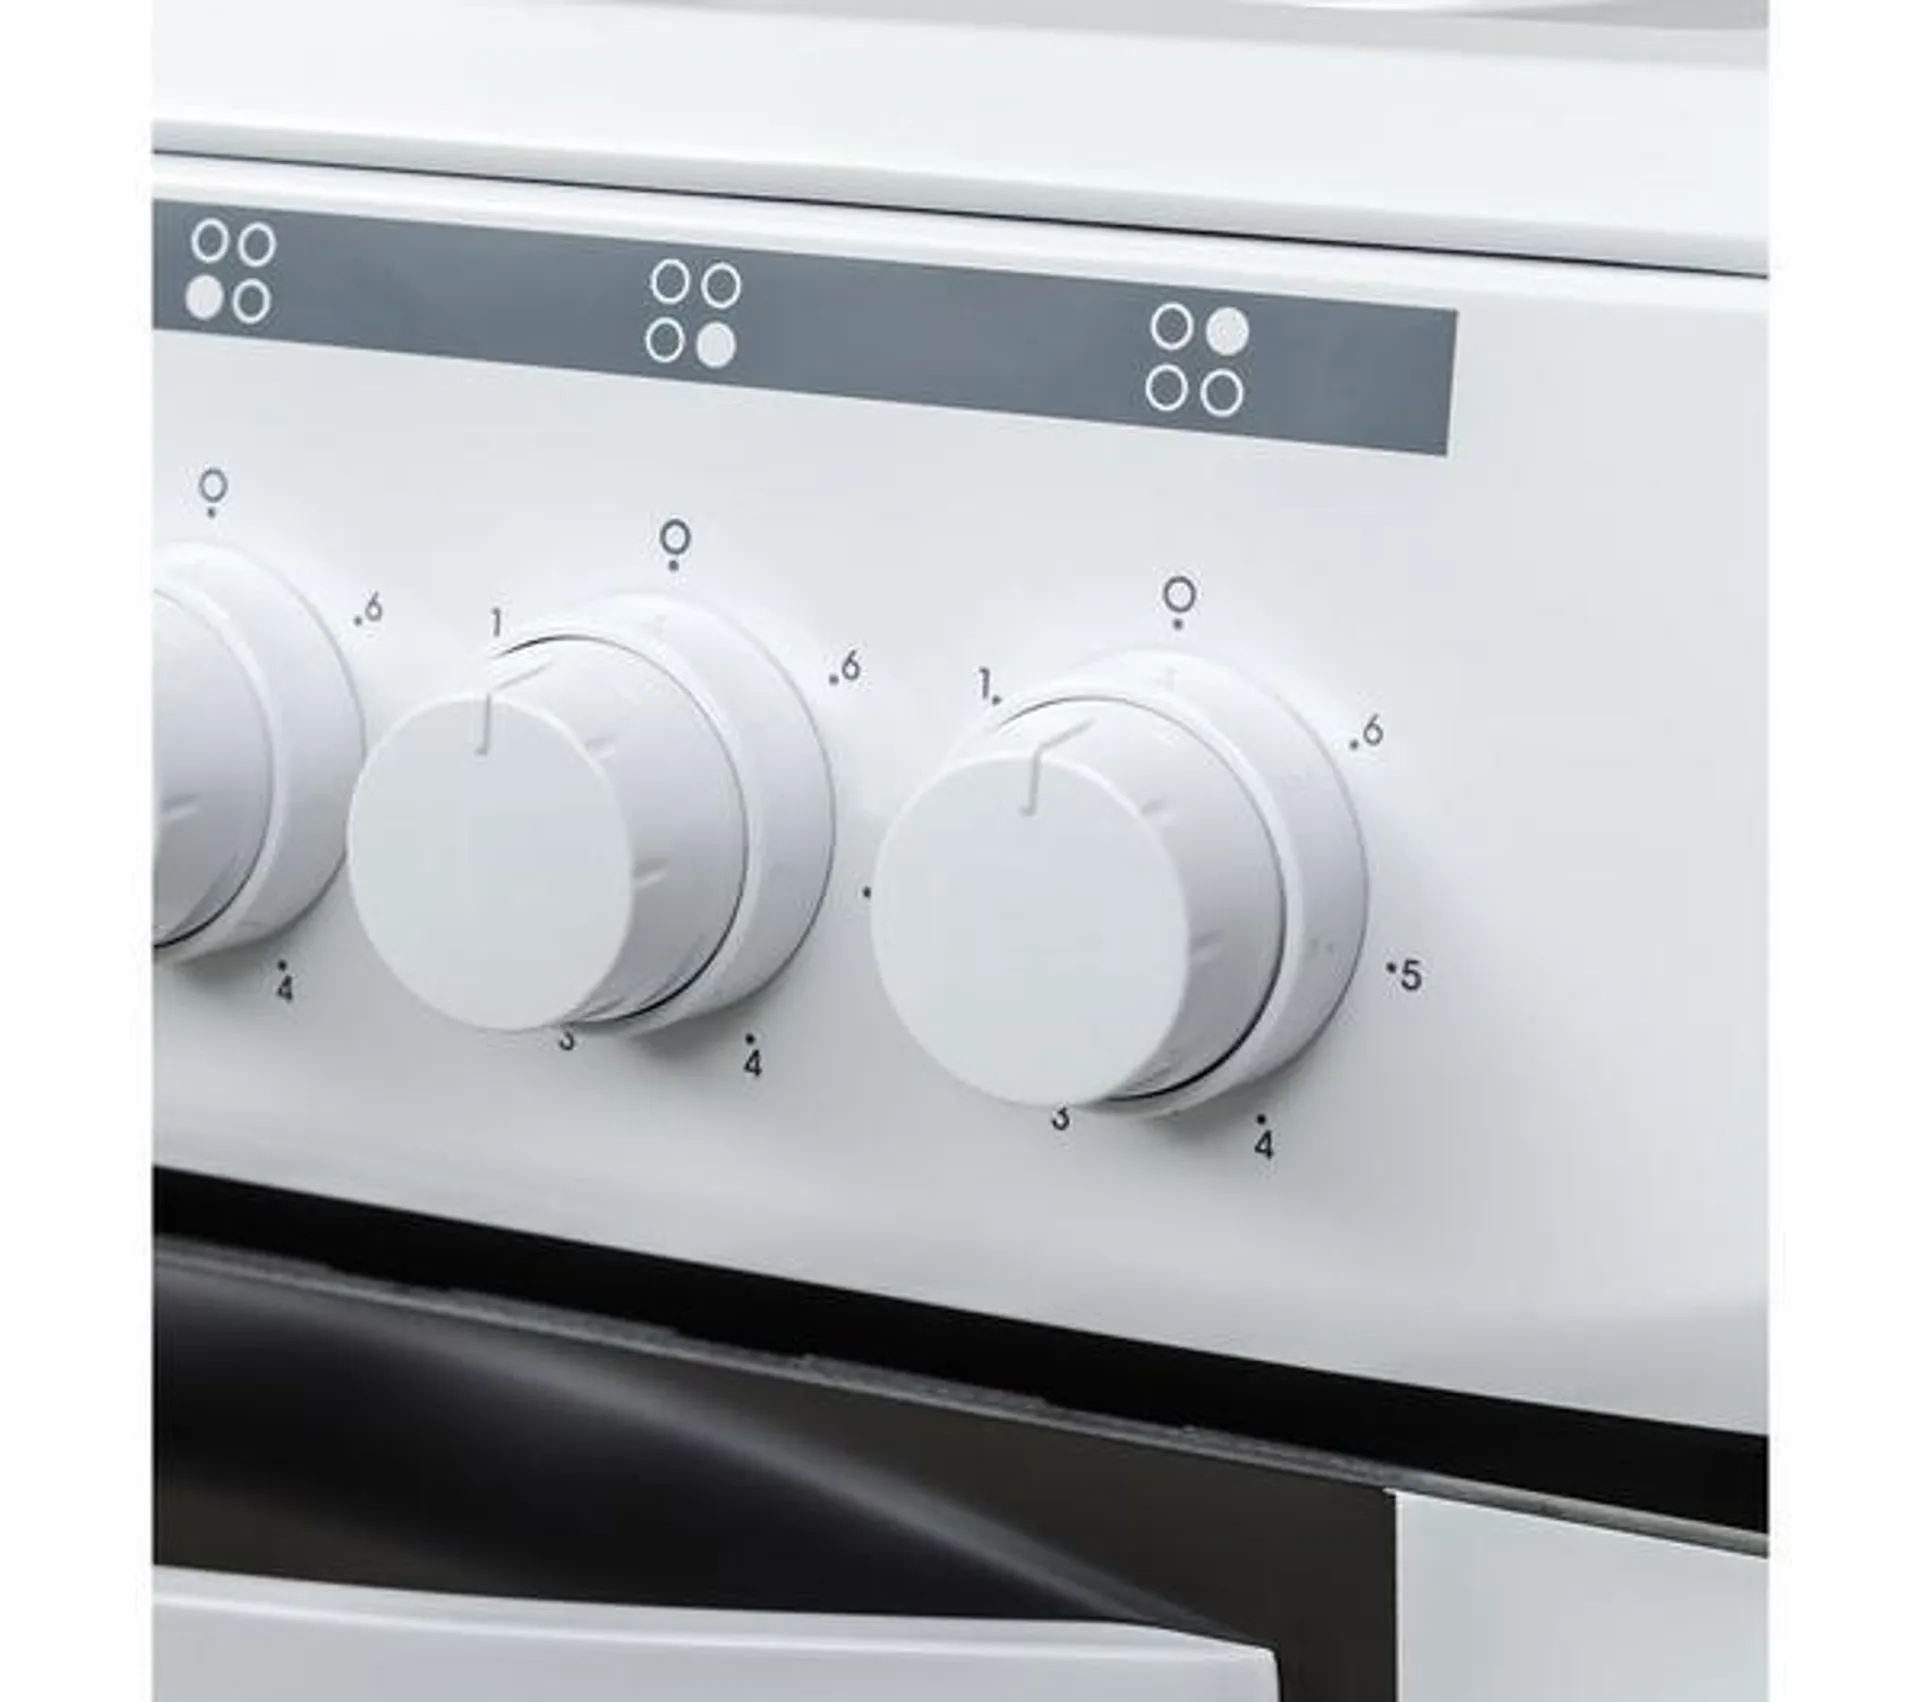 ESSENTIALS CFSEWH18 50 cm Electric Solid Plate Cooker - White